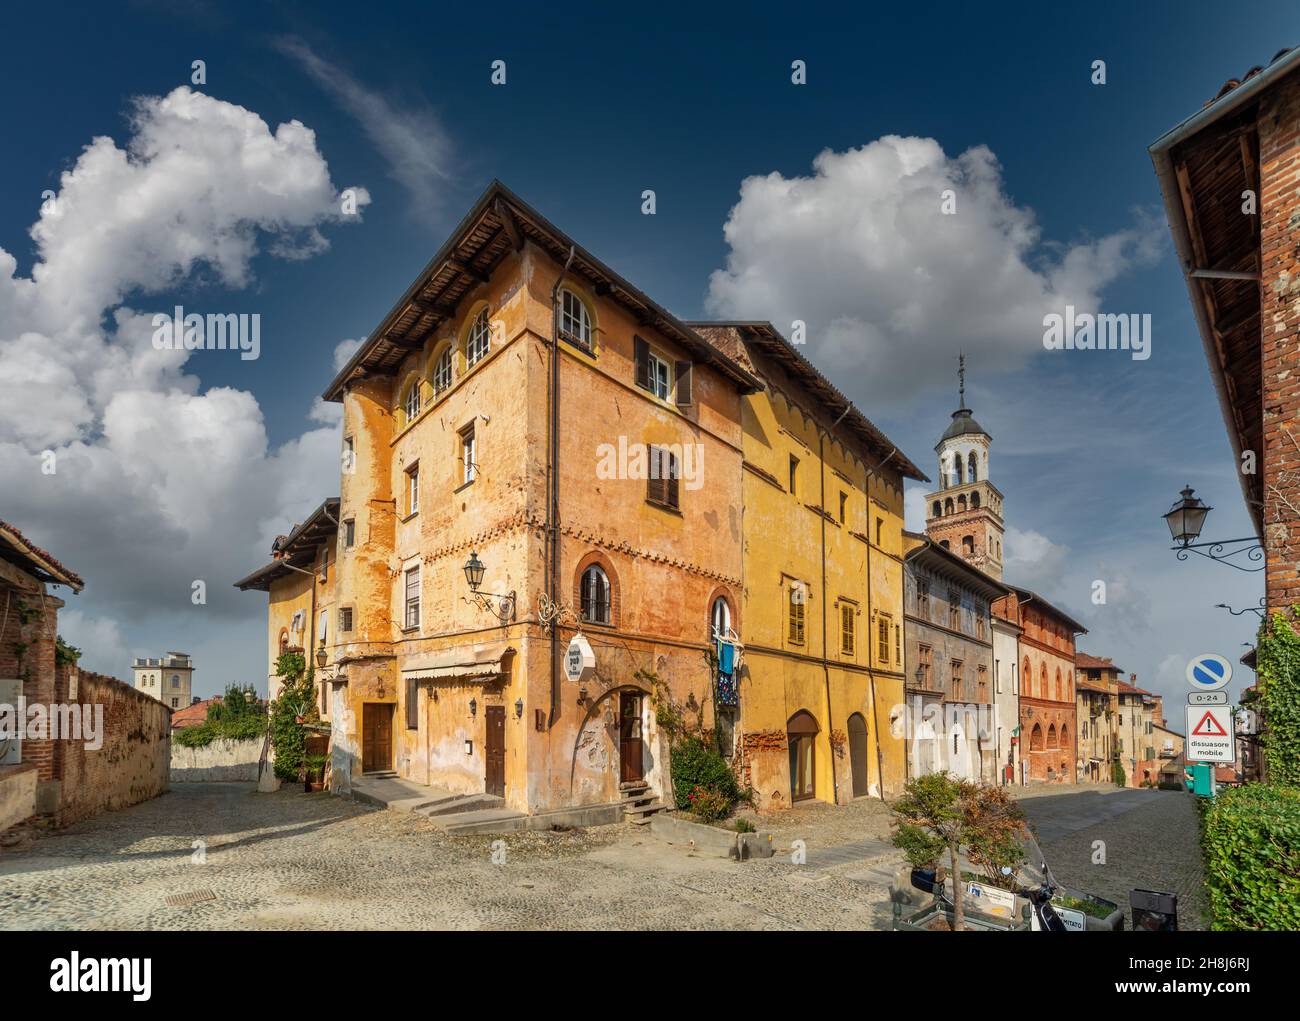 Saluzzo, Cuneo, Italy - October 19, 2021:  Salita al Castello street with ancient colorful historic buildings and in the background the civic tower (X Stock Photo